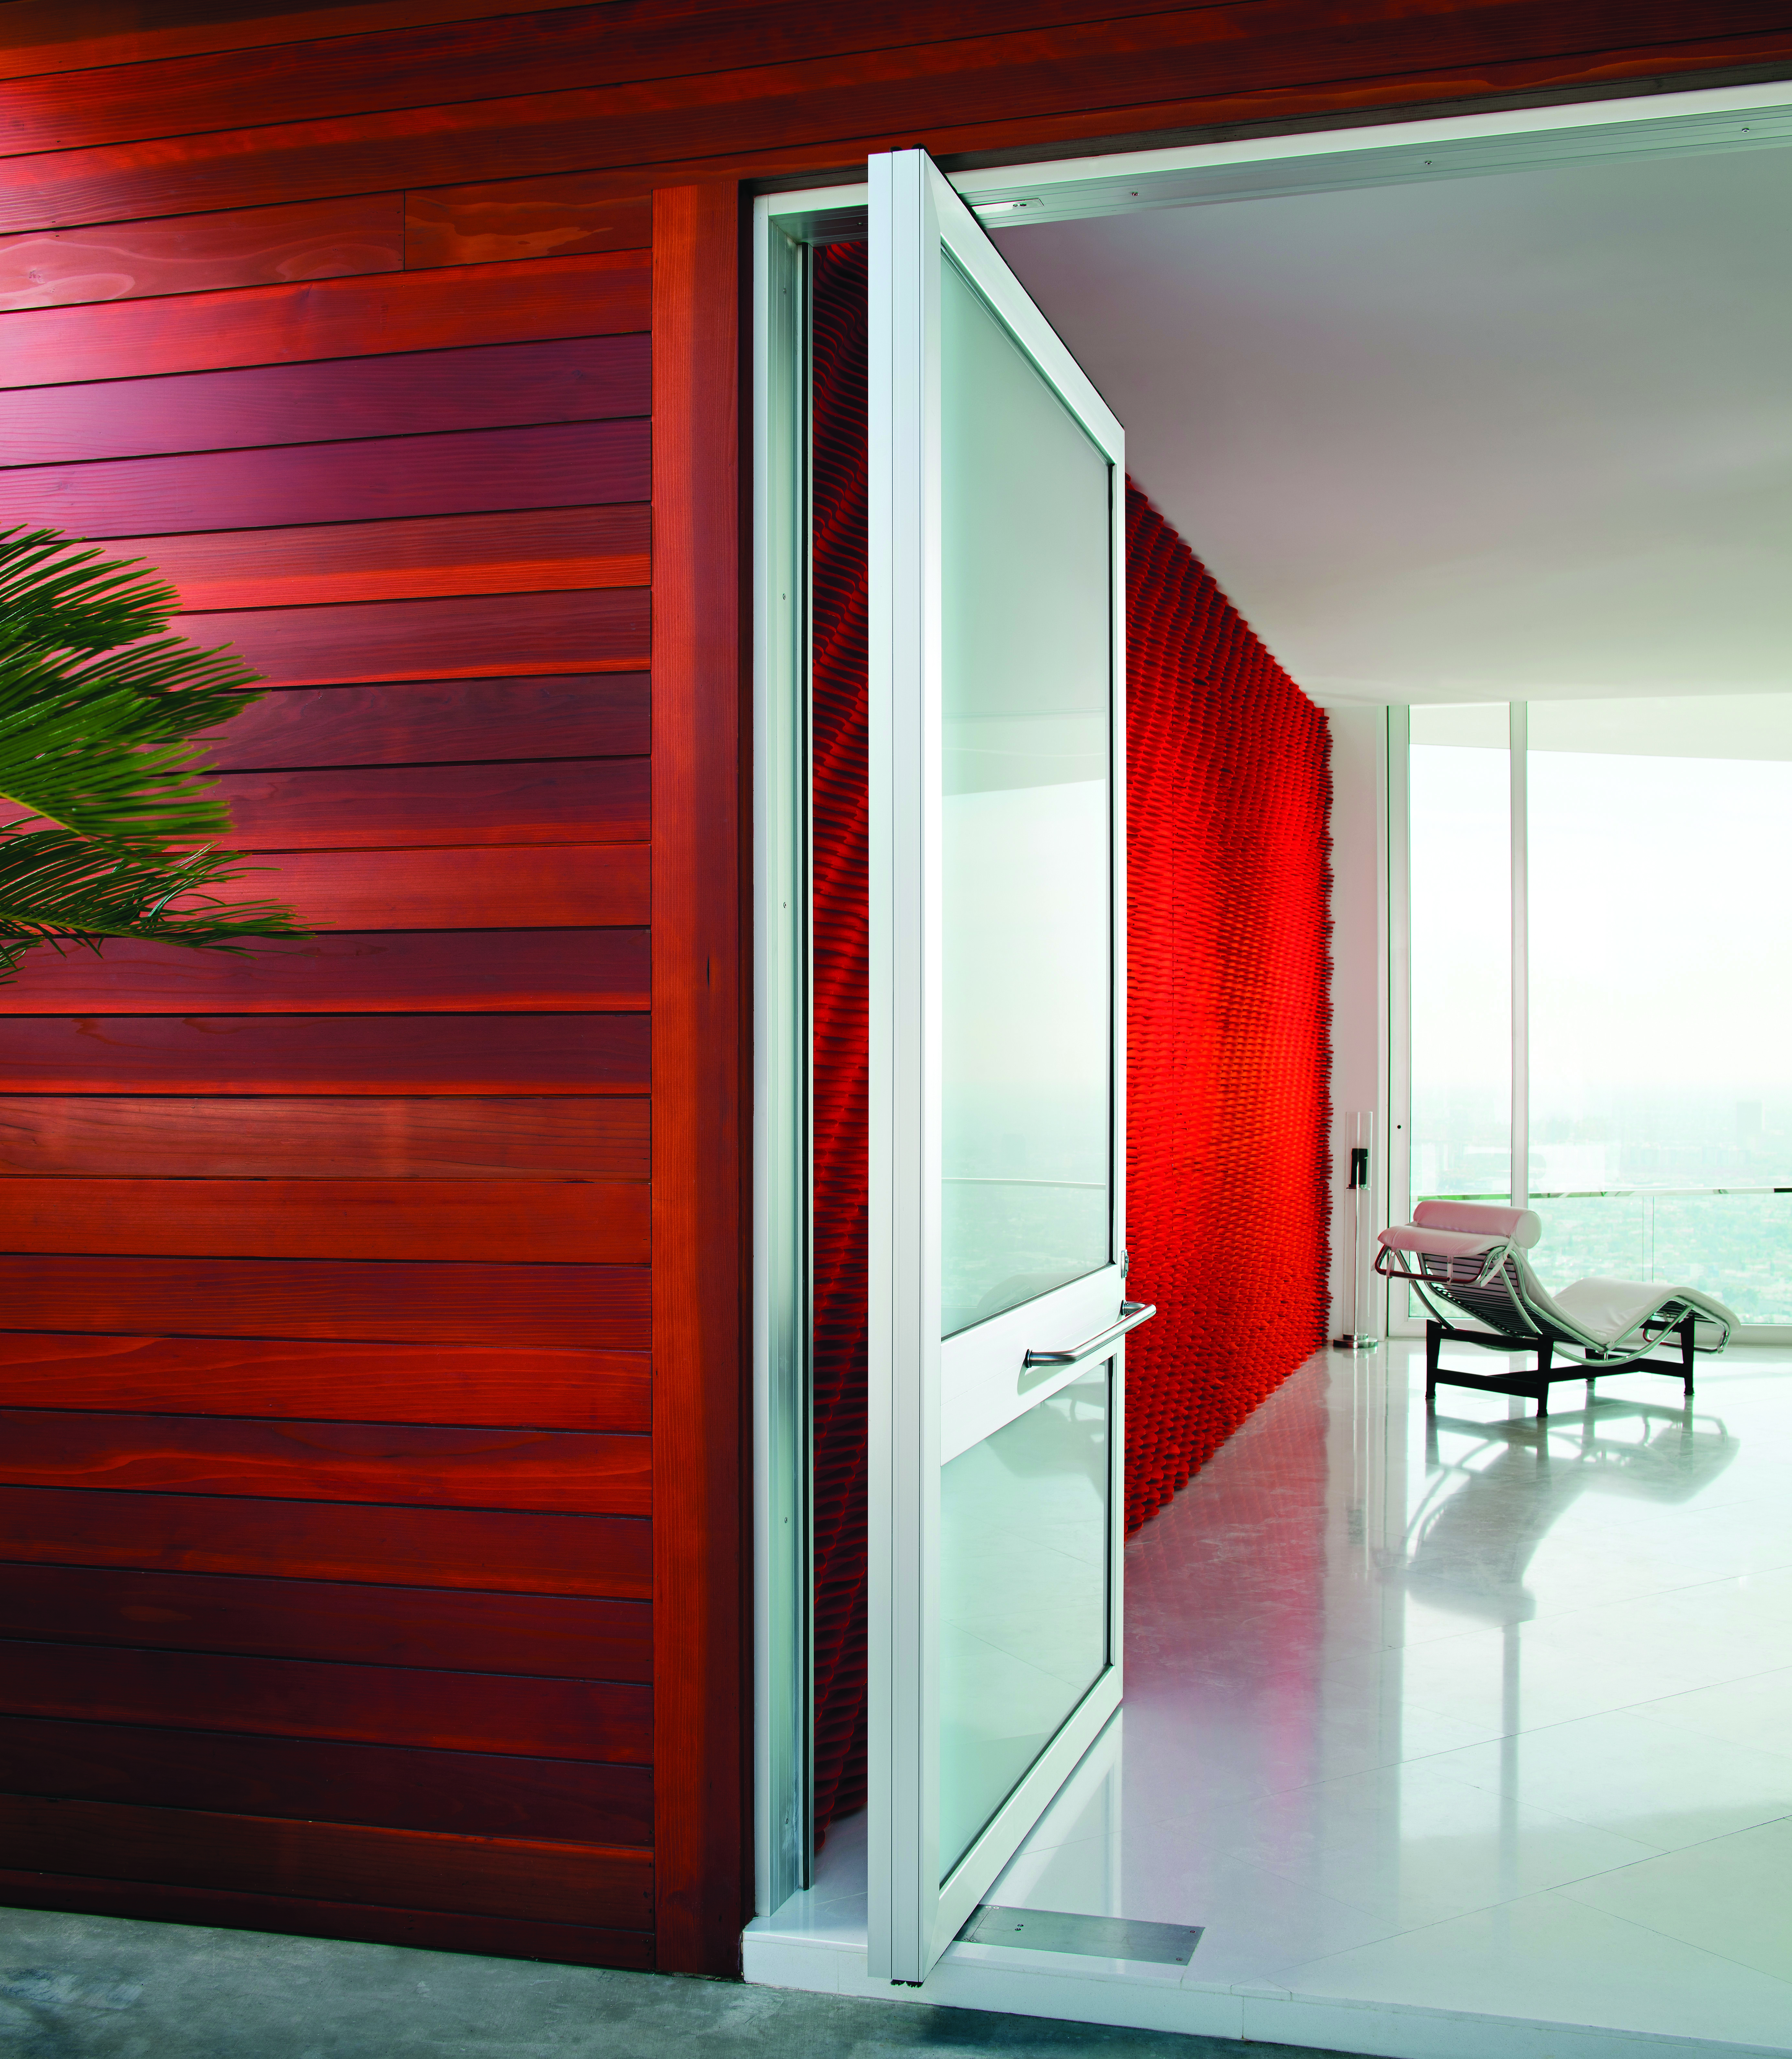 Red paneled interior wall of a minimalist home with a white pivot door open to a room overlooking a floor to ceiling window